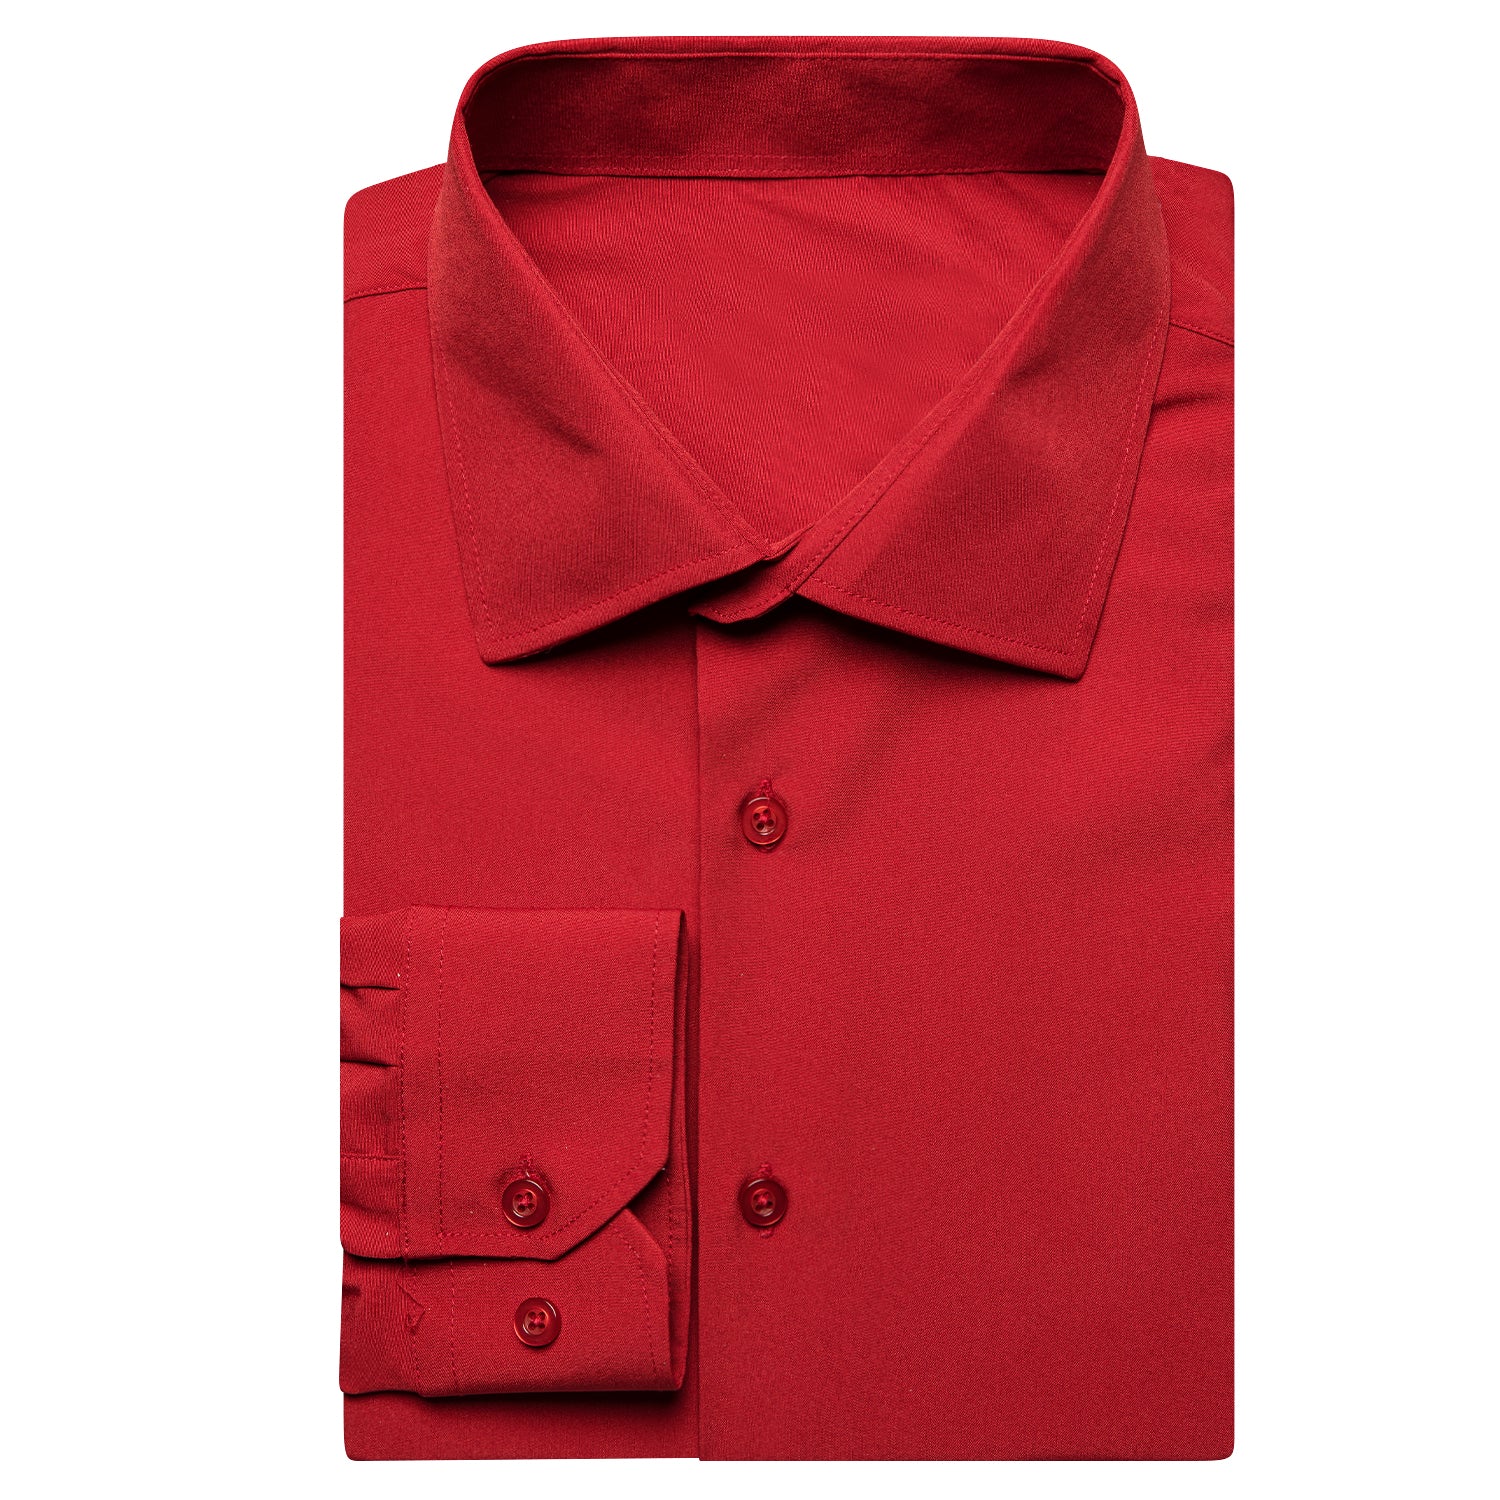 Luxury Red Solid Men's Long Sleeve Dress Shirt